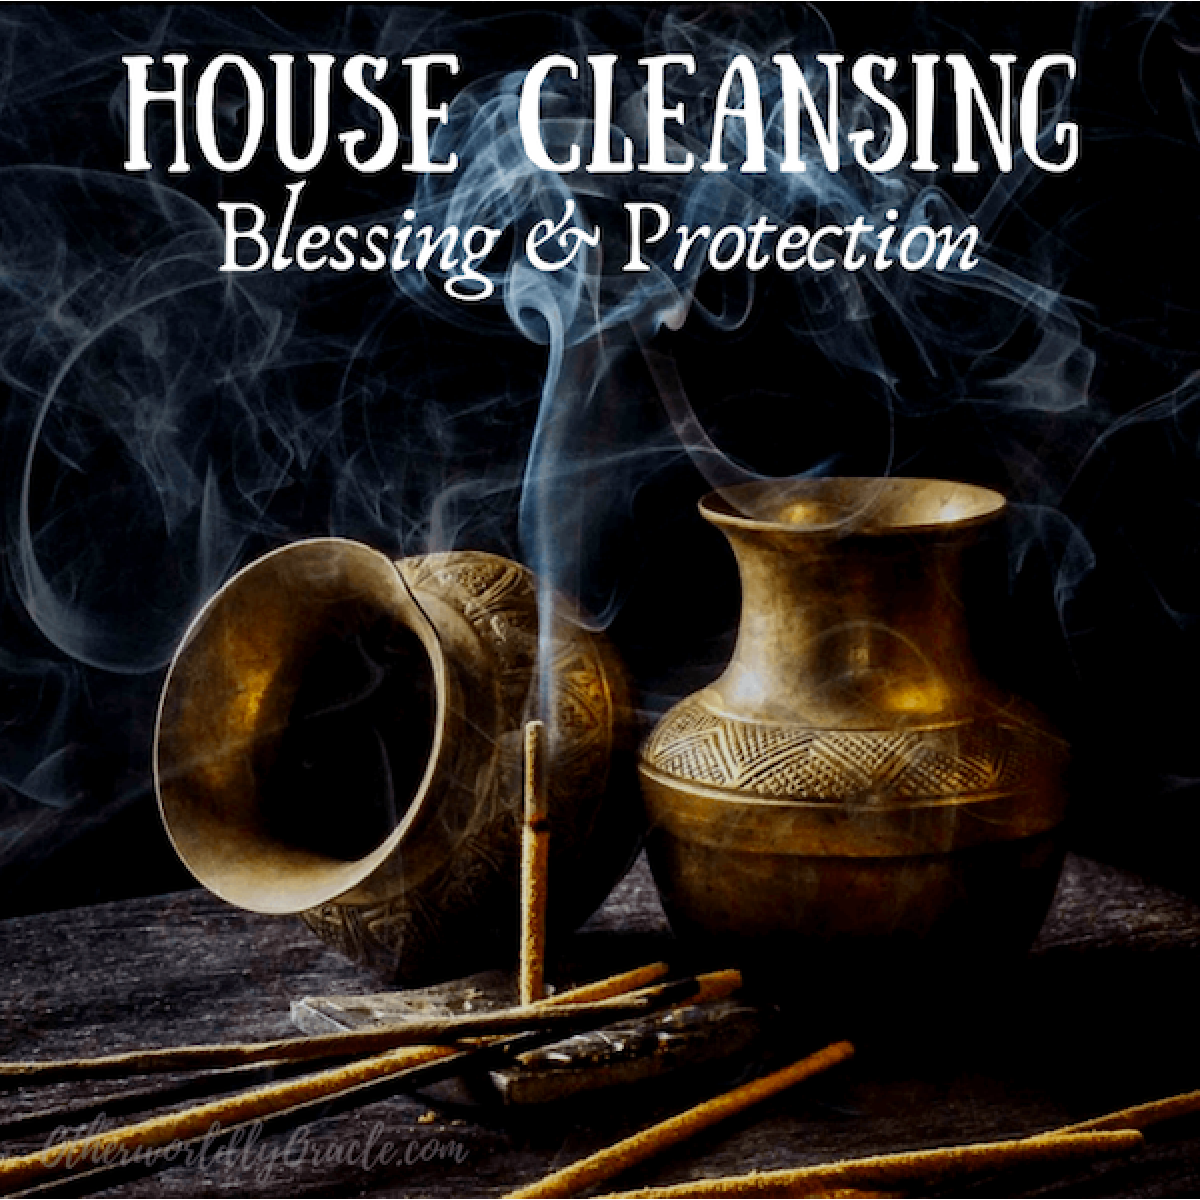 Cleanse house. Blessing of Protection.